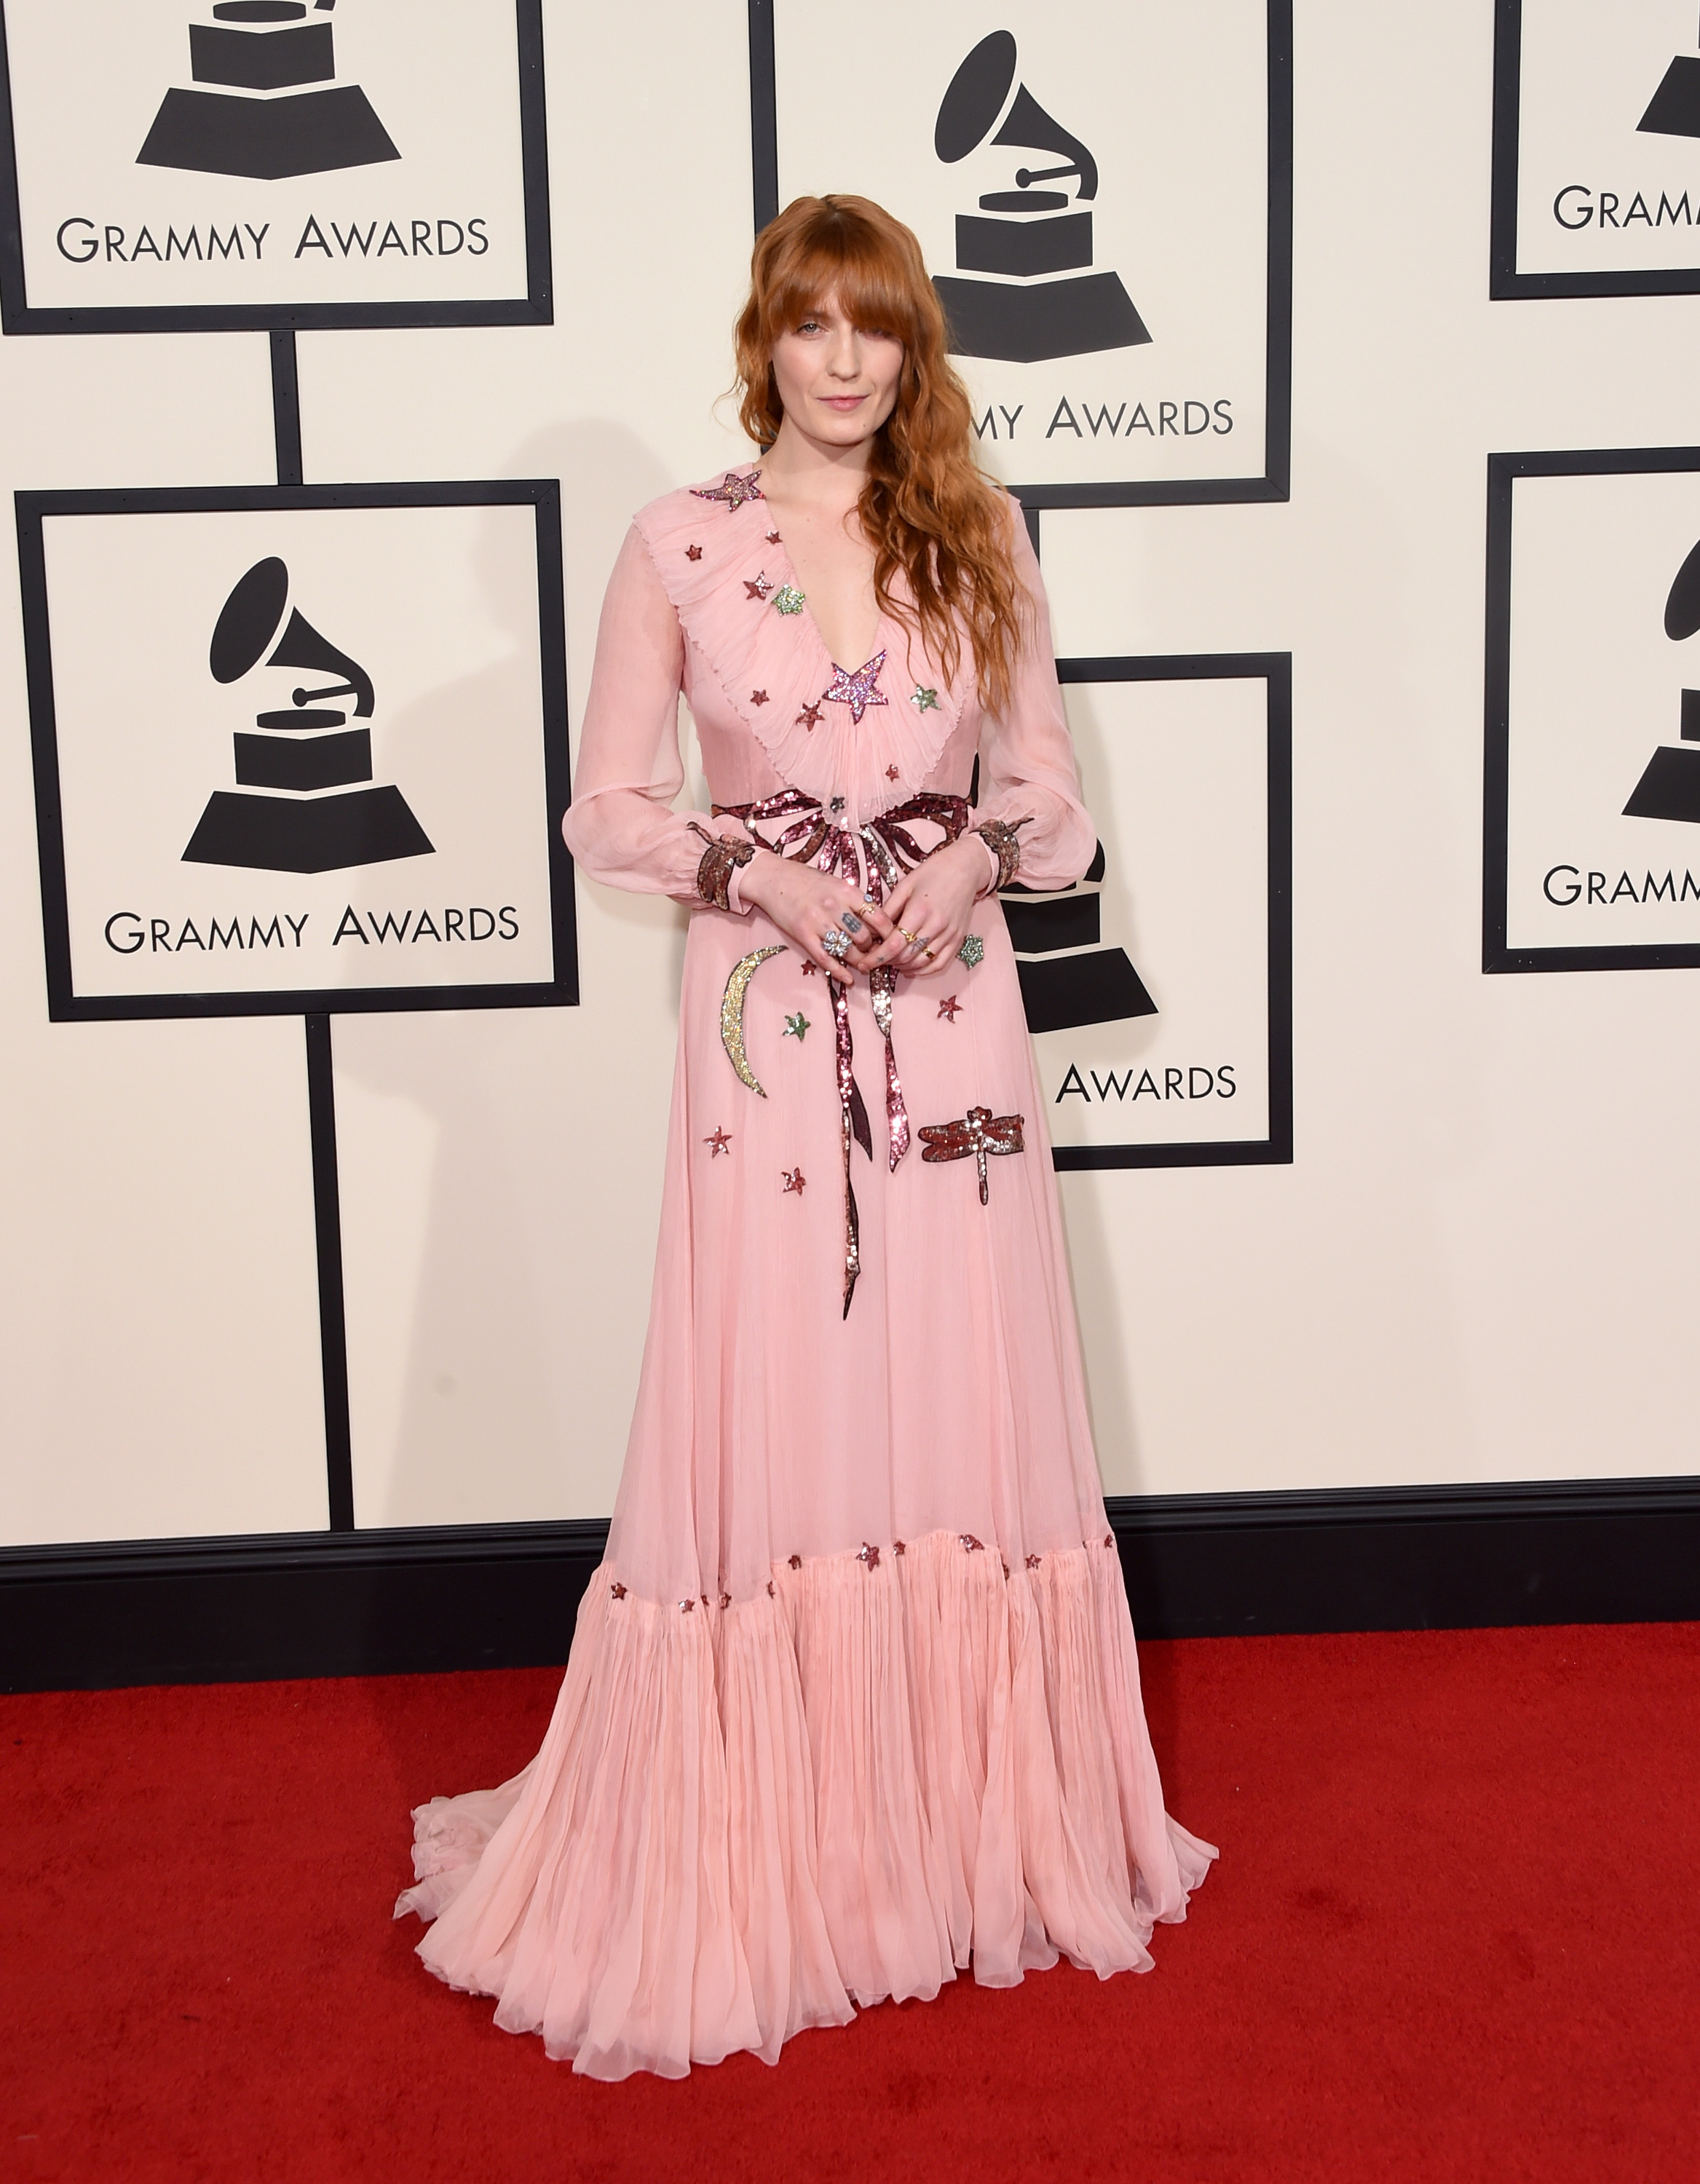 Florence Welch attends the 58th GRAMMY Awards at Staples Center on Feb. 15, 2016 in Los Angeles.